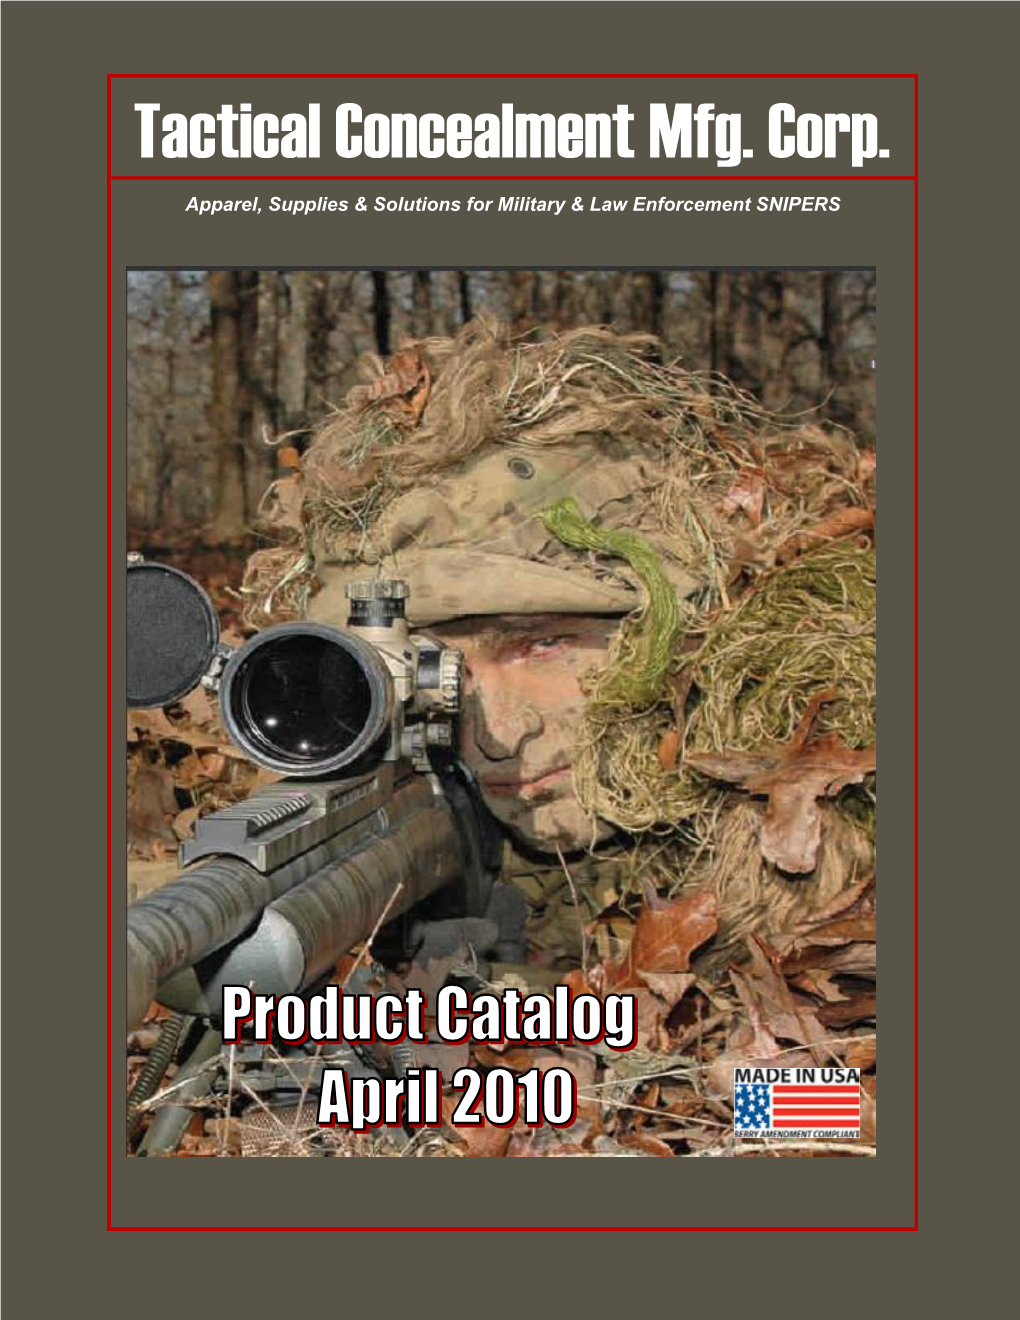 Tactical Concealment Mfg. Corp. Apparel, Supplies & Solutions for Military & Law Enforcement SNIPERS